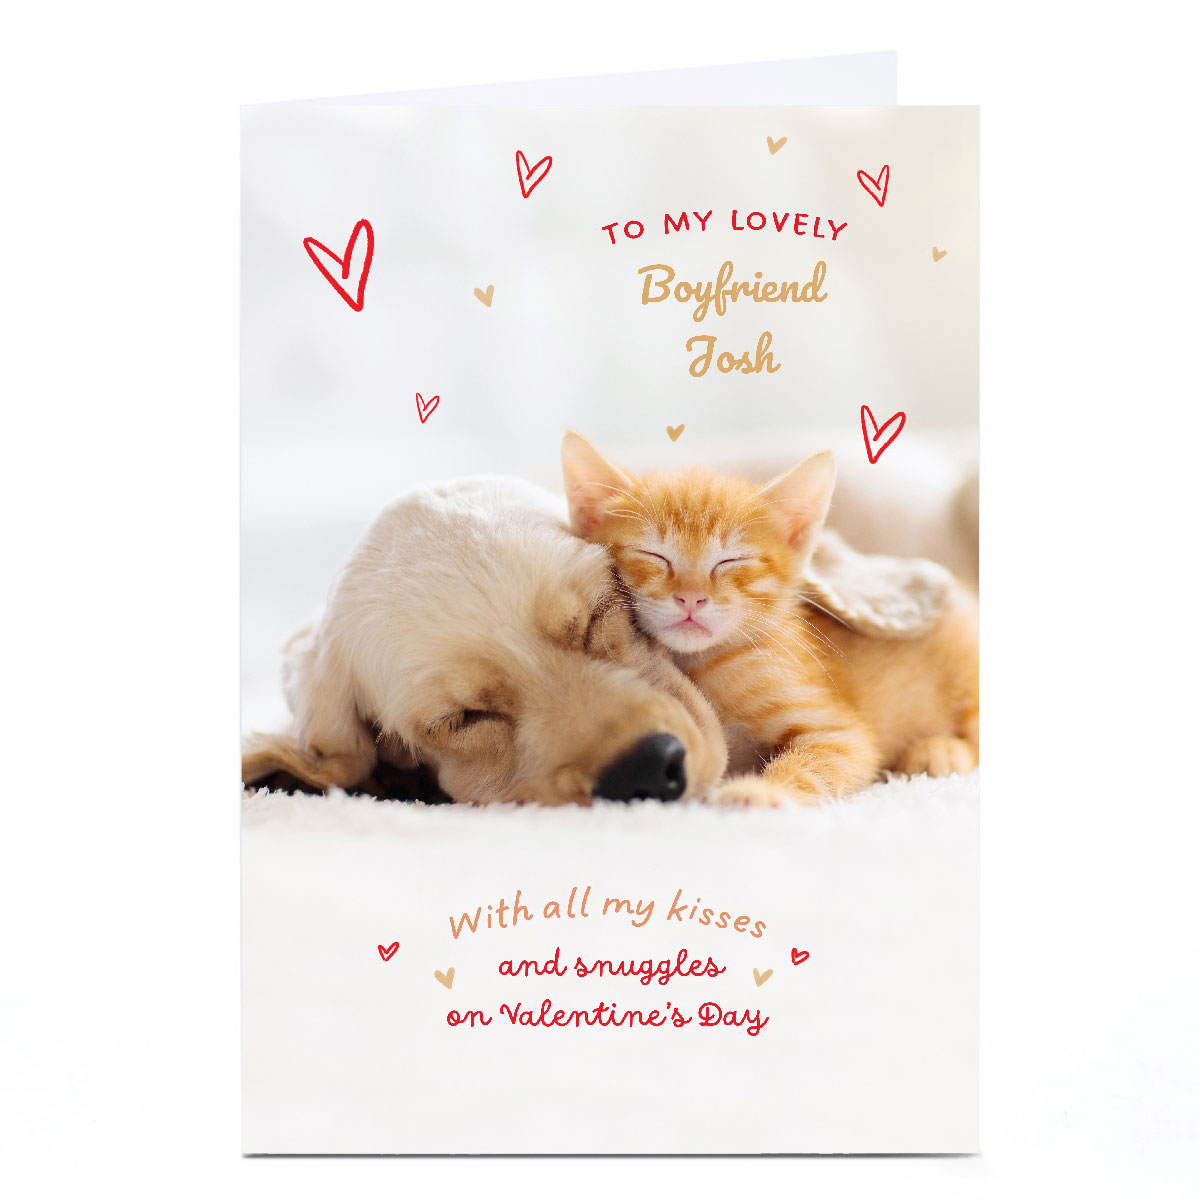 Personalised Valentine's Day Card - Puppy and Kitten Snuggles, Boyfriend